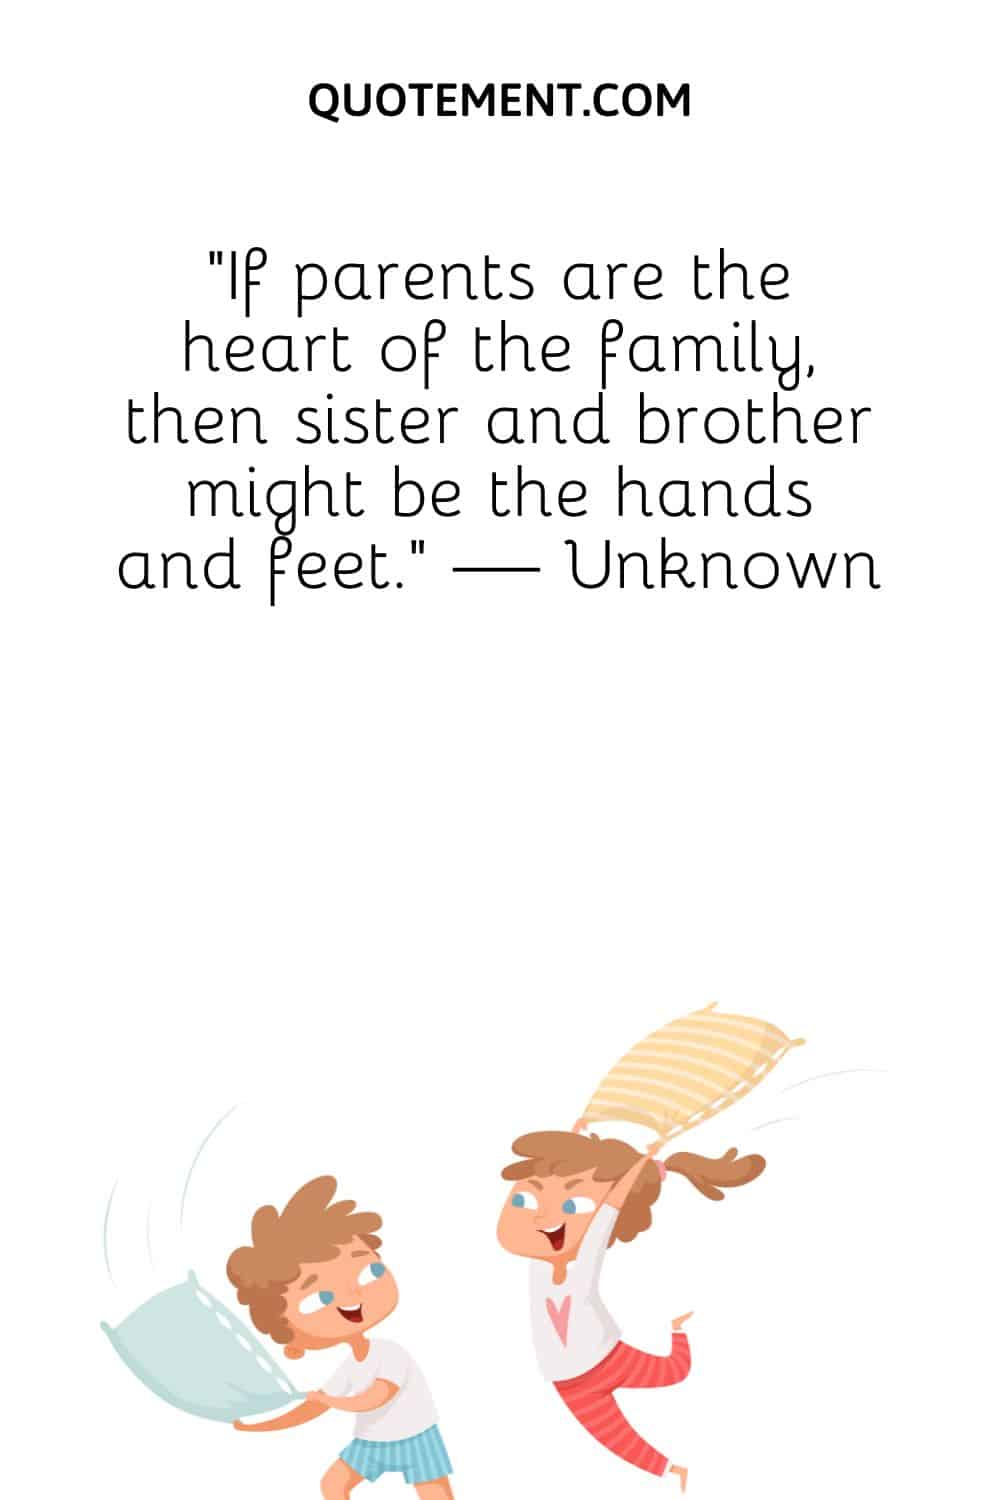 If parents are the heart of the family, then sister and brother might be the hands and feet